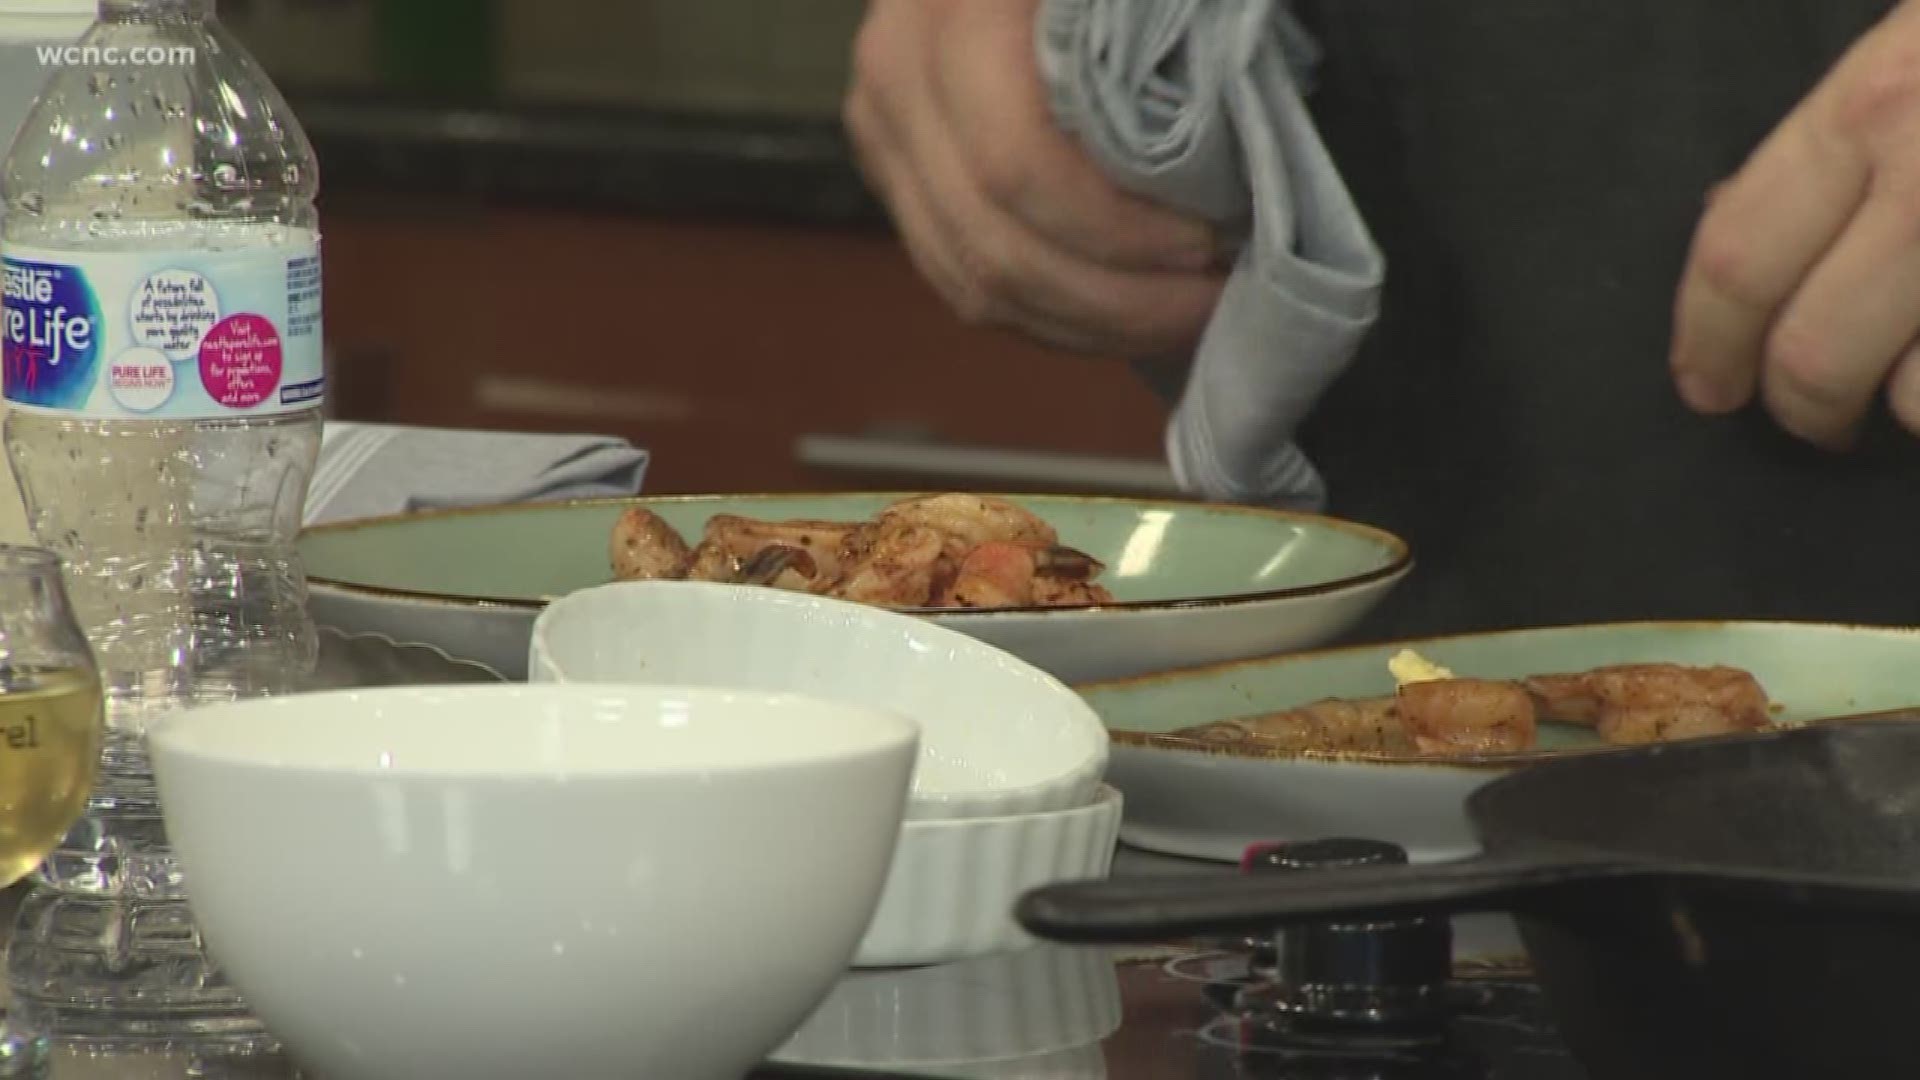 Chef Ben Sholiton from the Foundry Restaurant puts a Cajun twist on the recipe